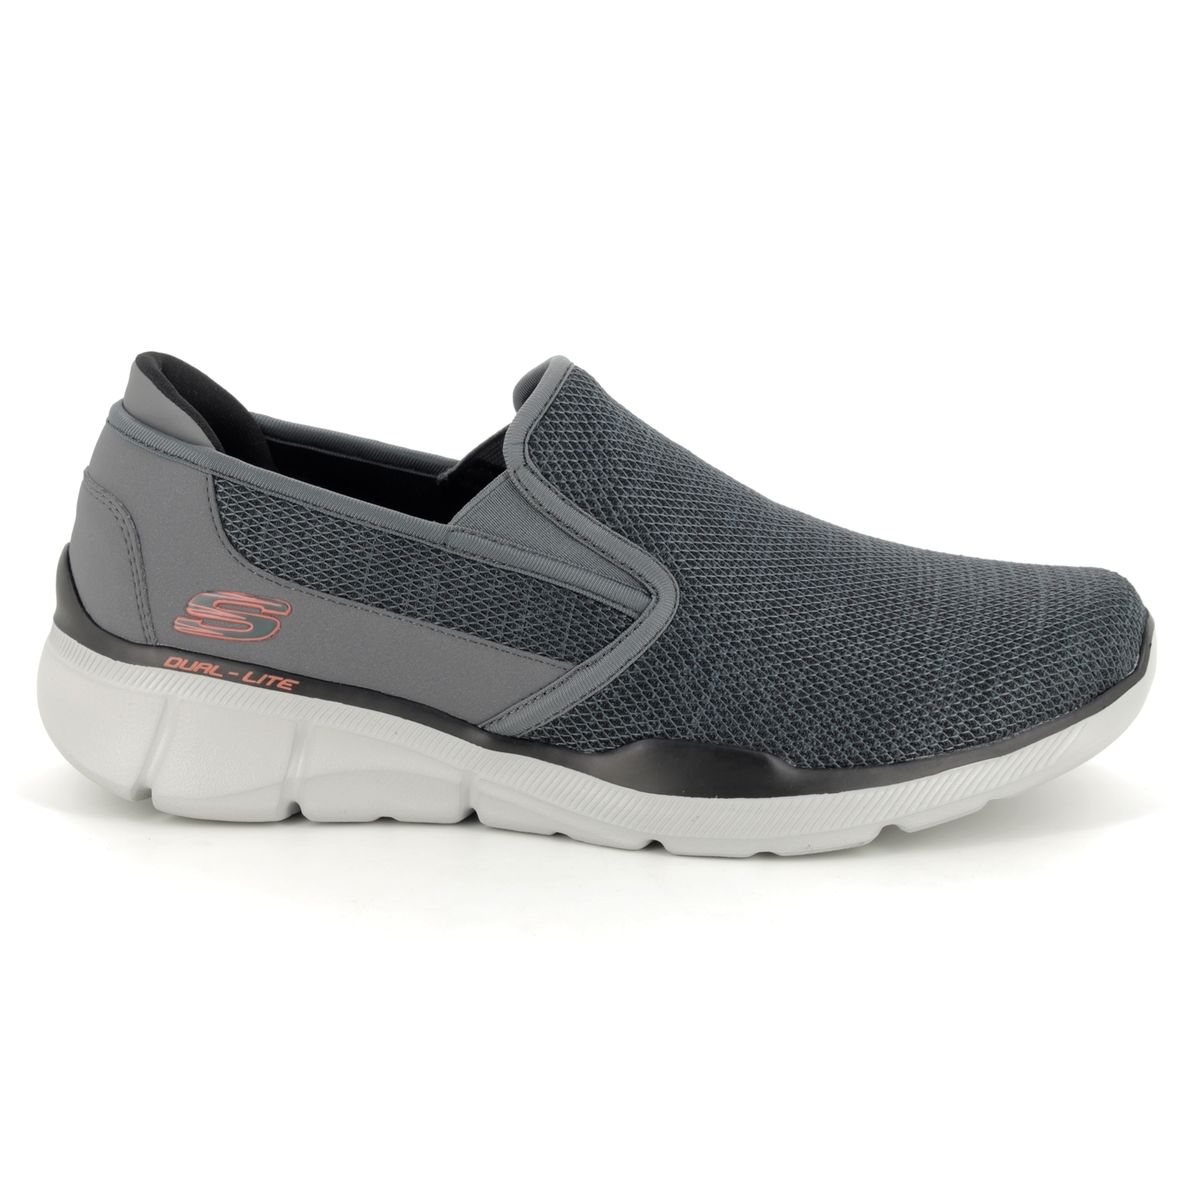 skechers dual lite relaxed fit